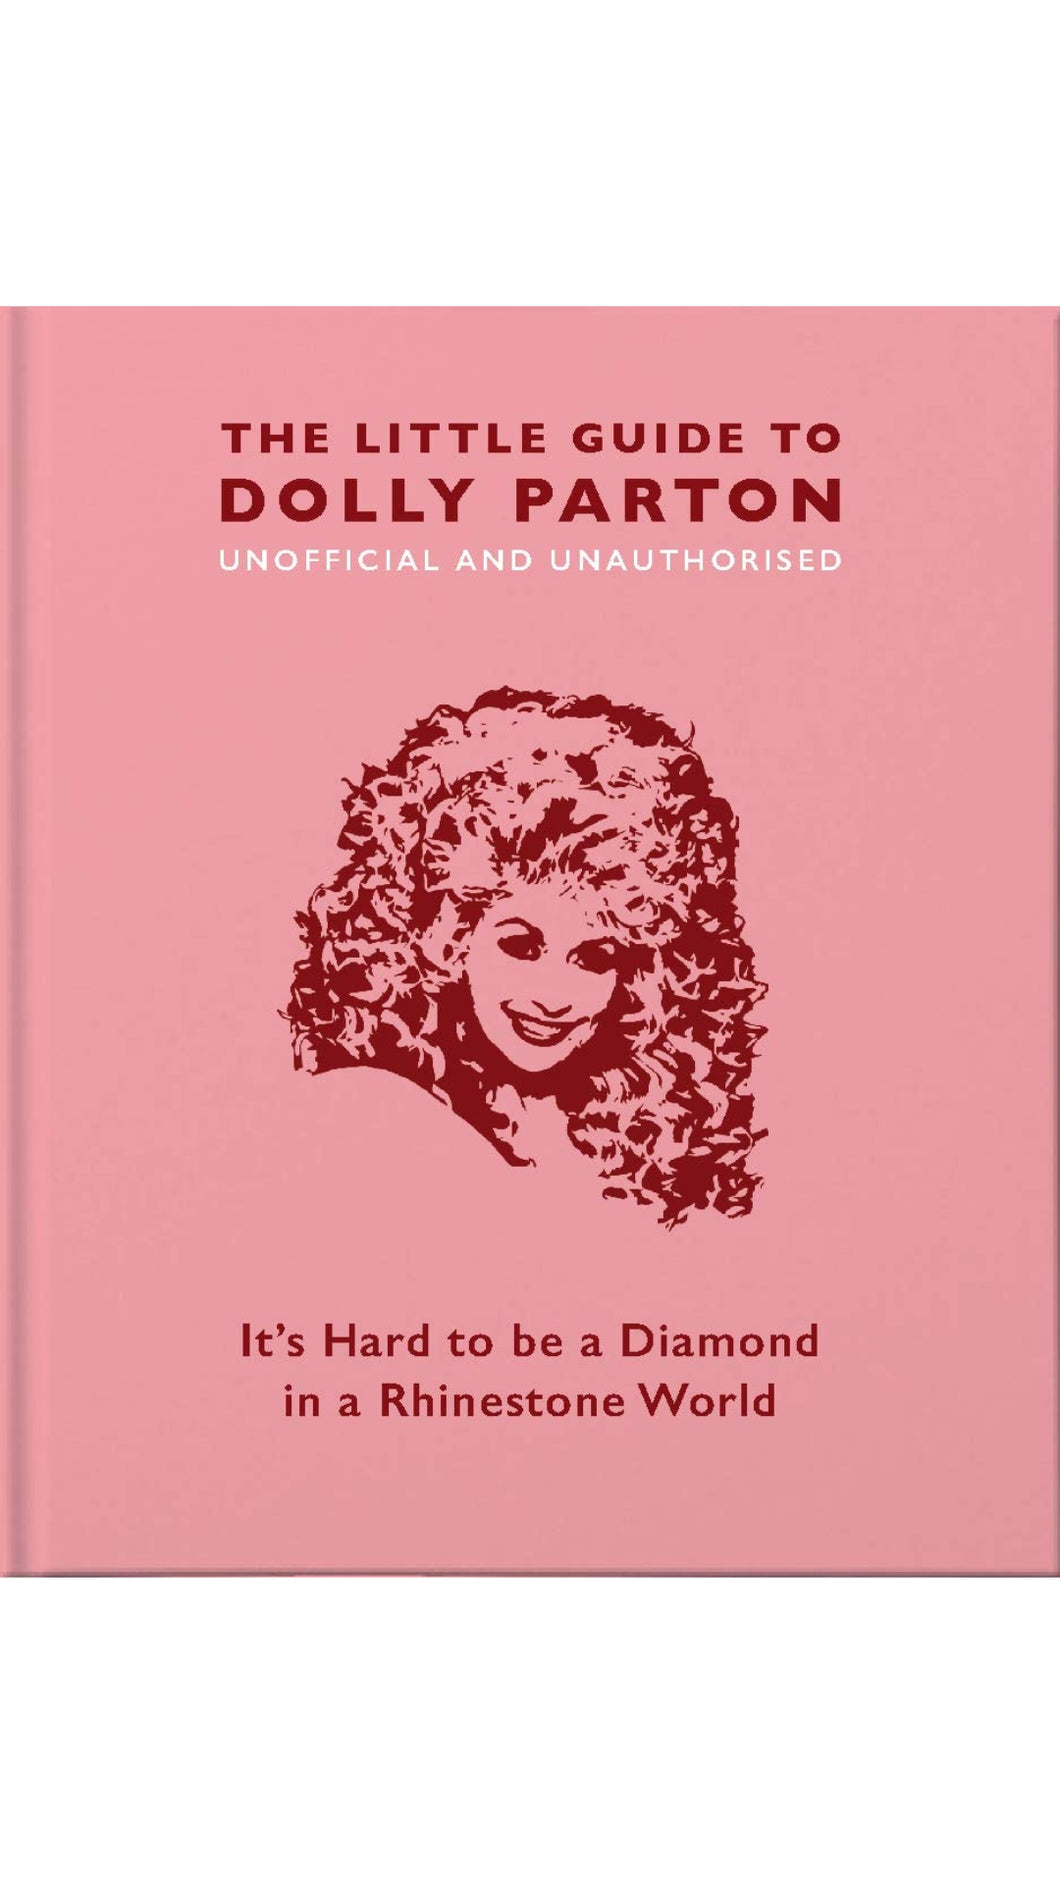 The Little Guide to Dolly Parton: It’s Hard to be a Diamond in a Rhinestone World